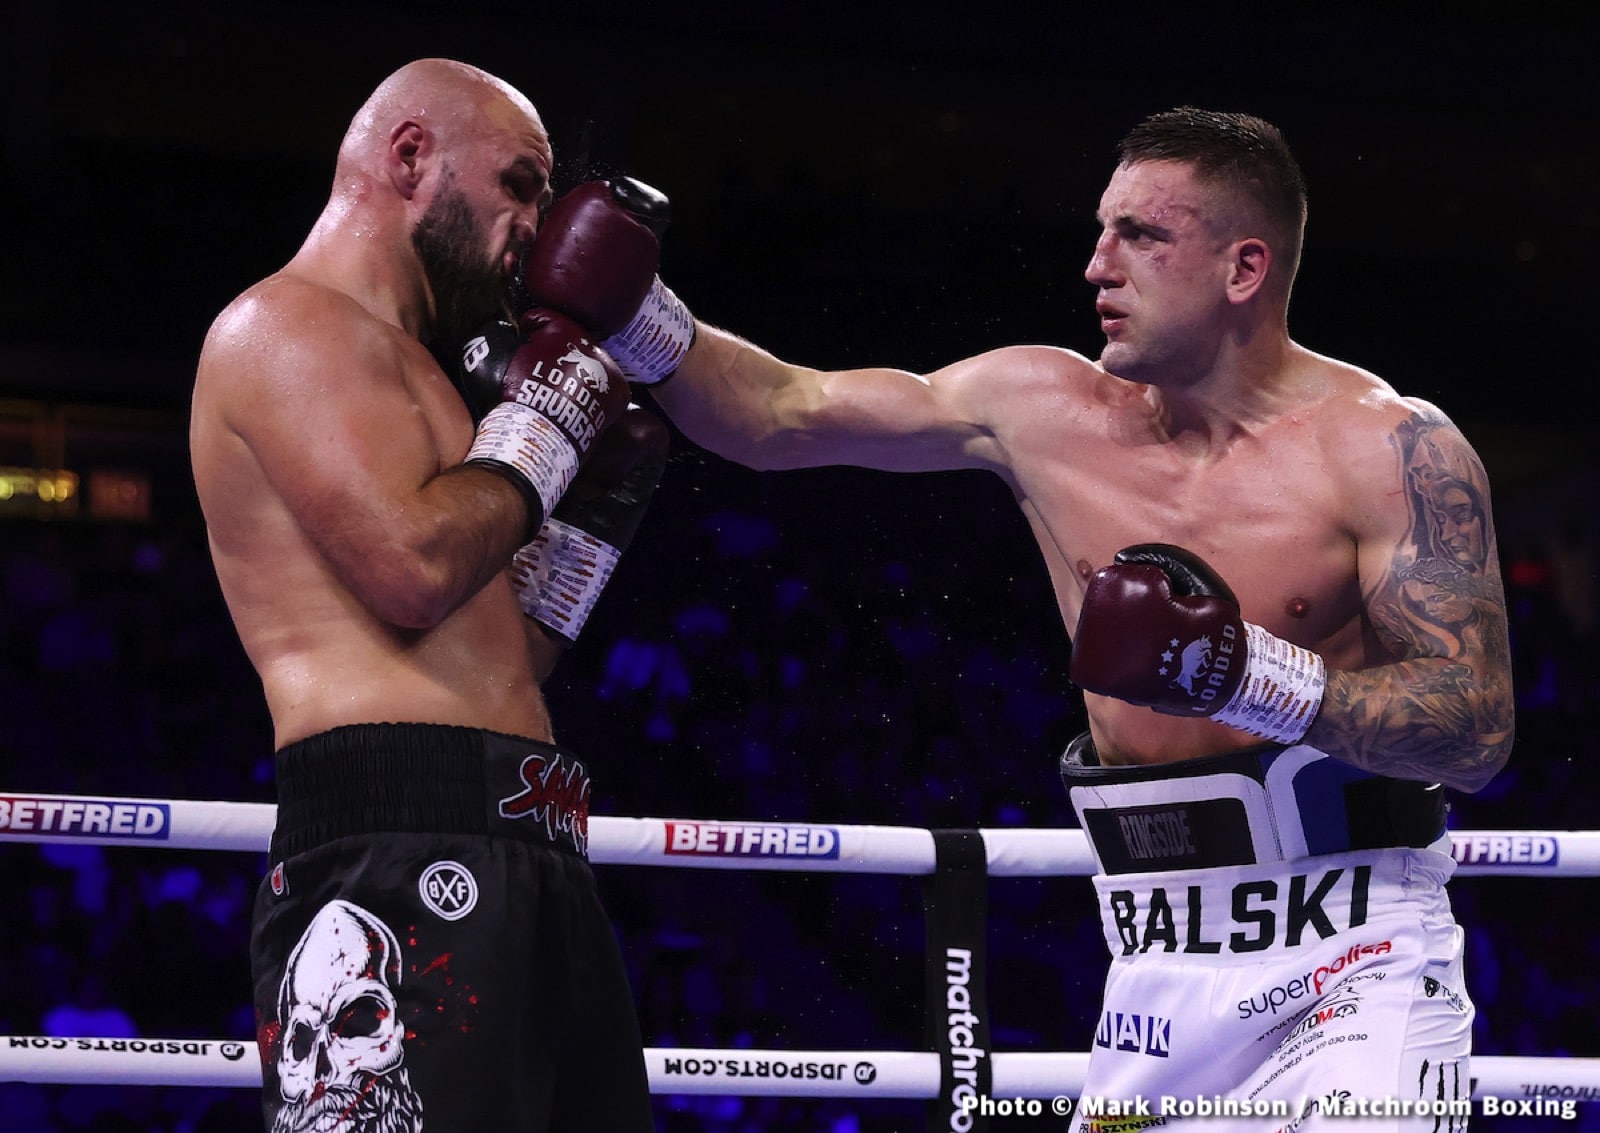 Alen Babic Gives Us Another Wild One With Tough Win Over Balski - Boxing Results